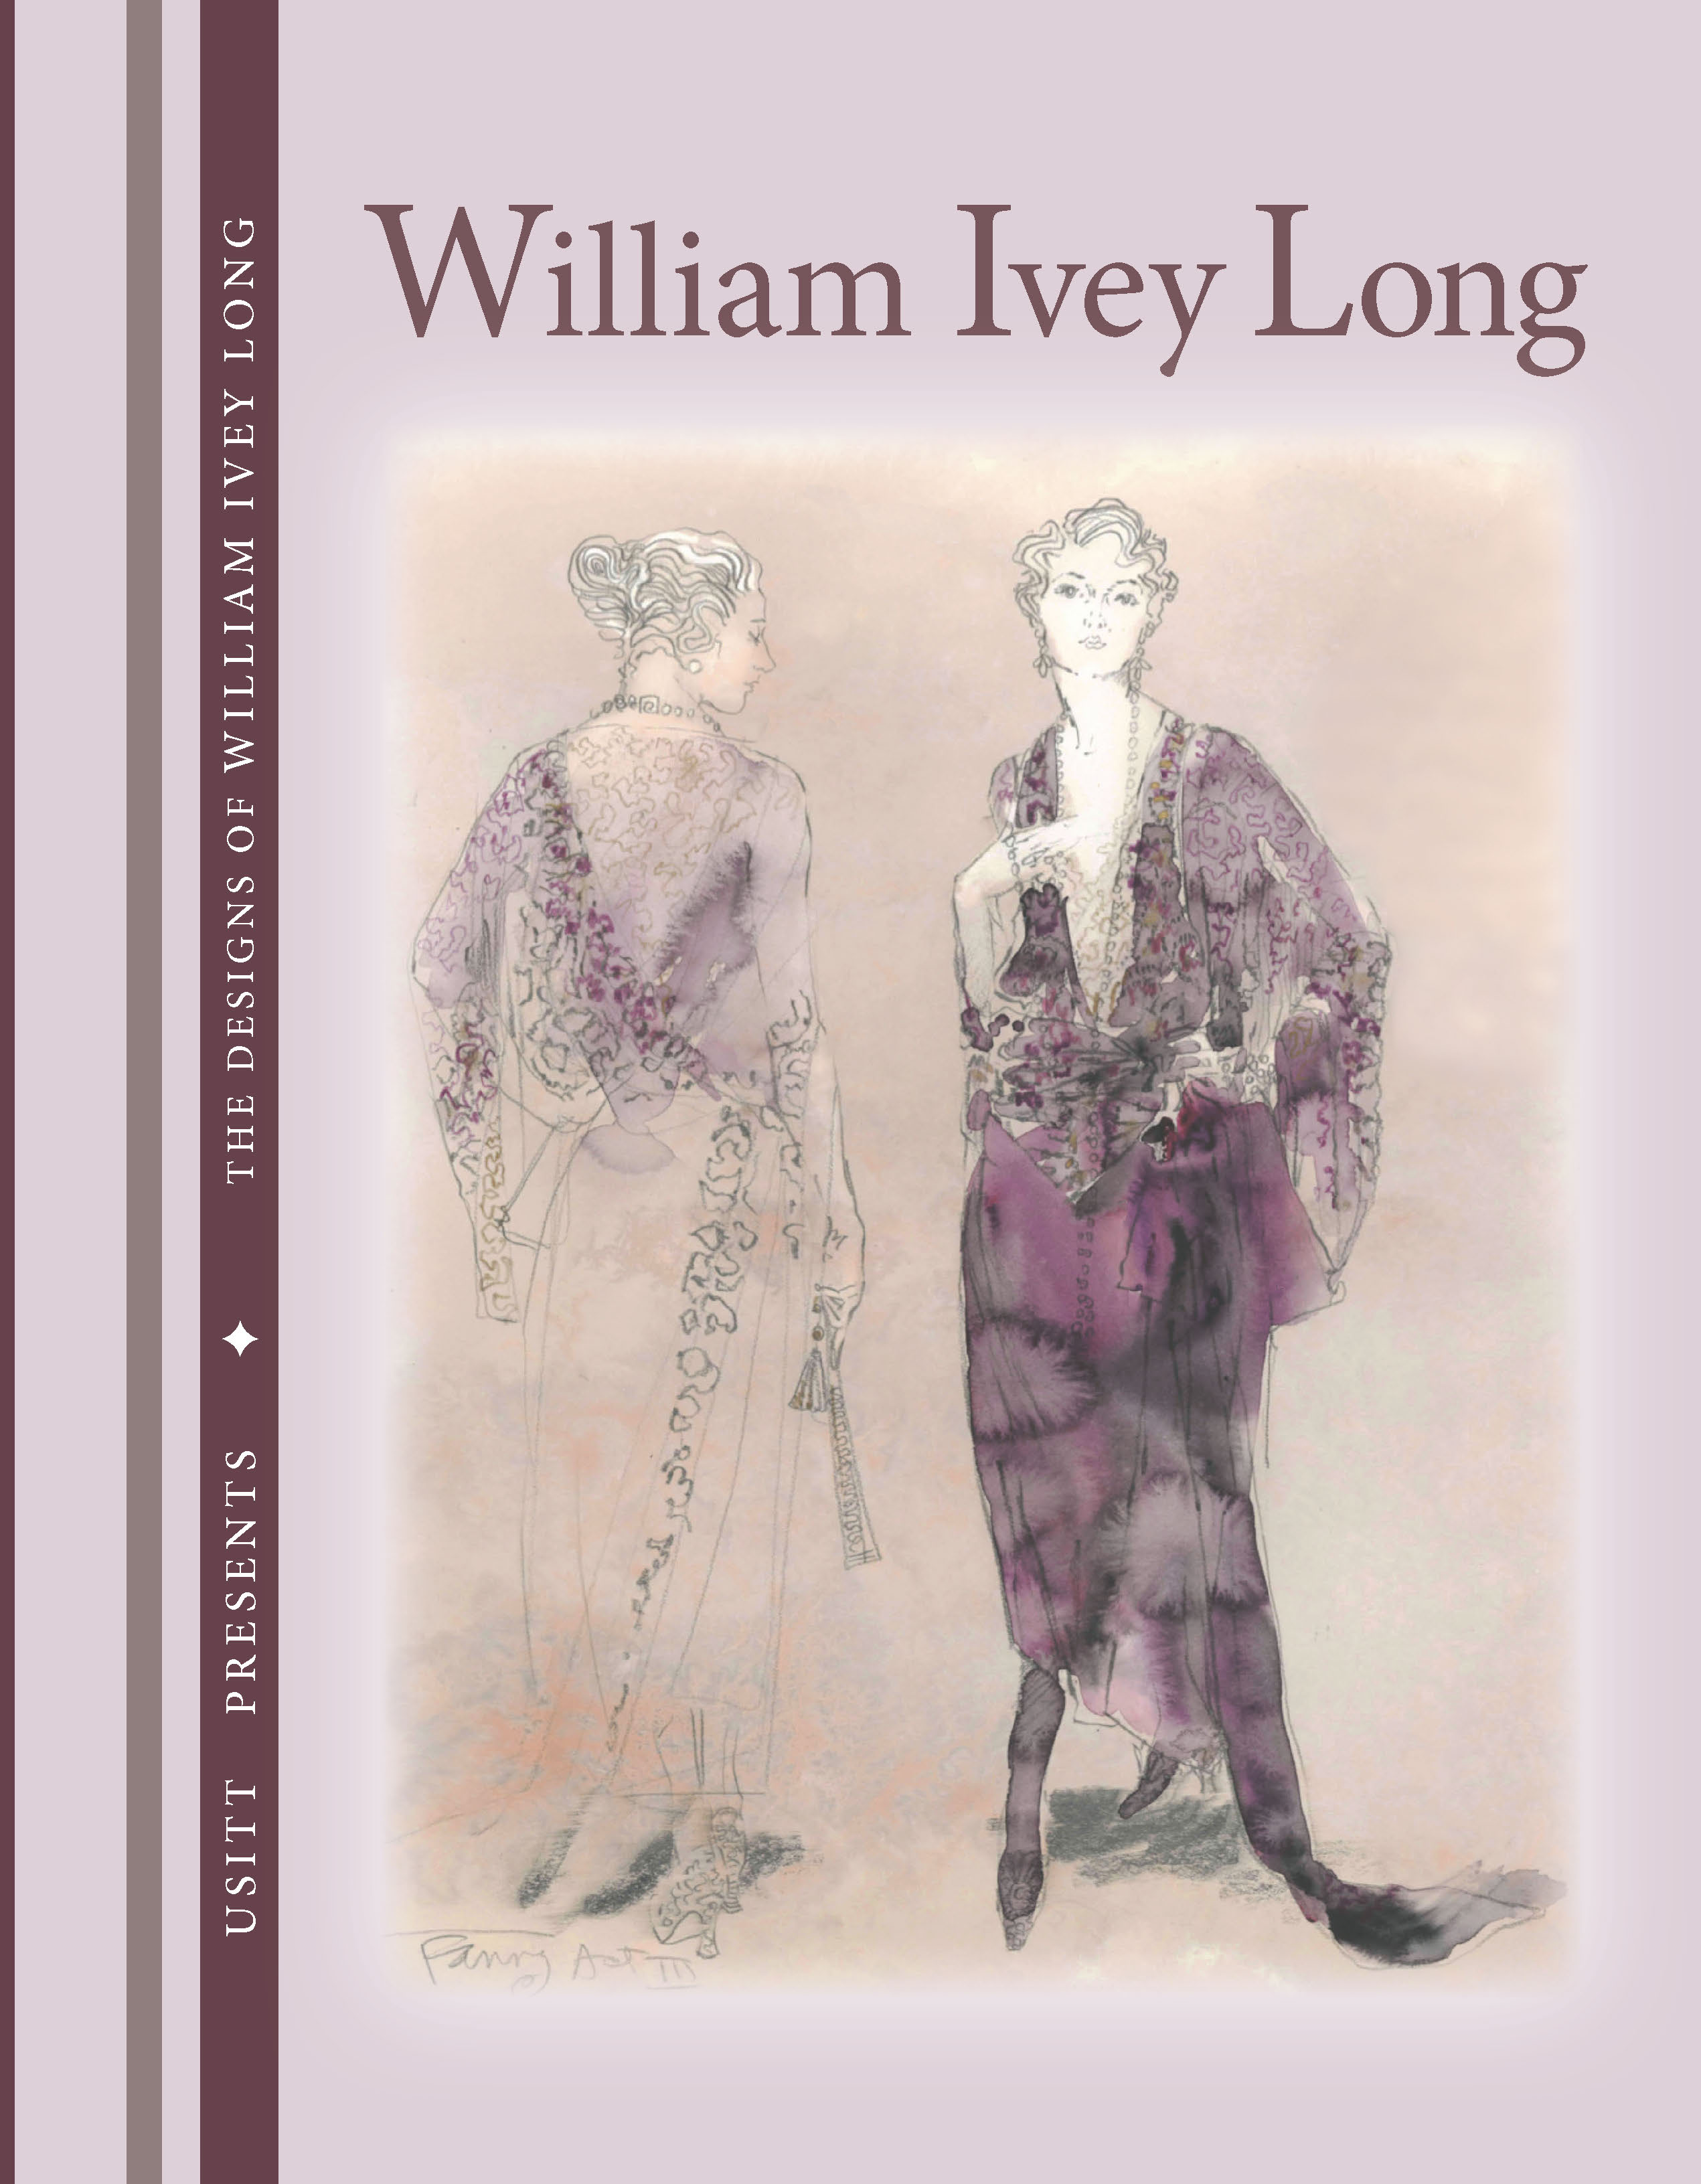 Book cover for "The Designs of William Ivey Long"